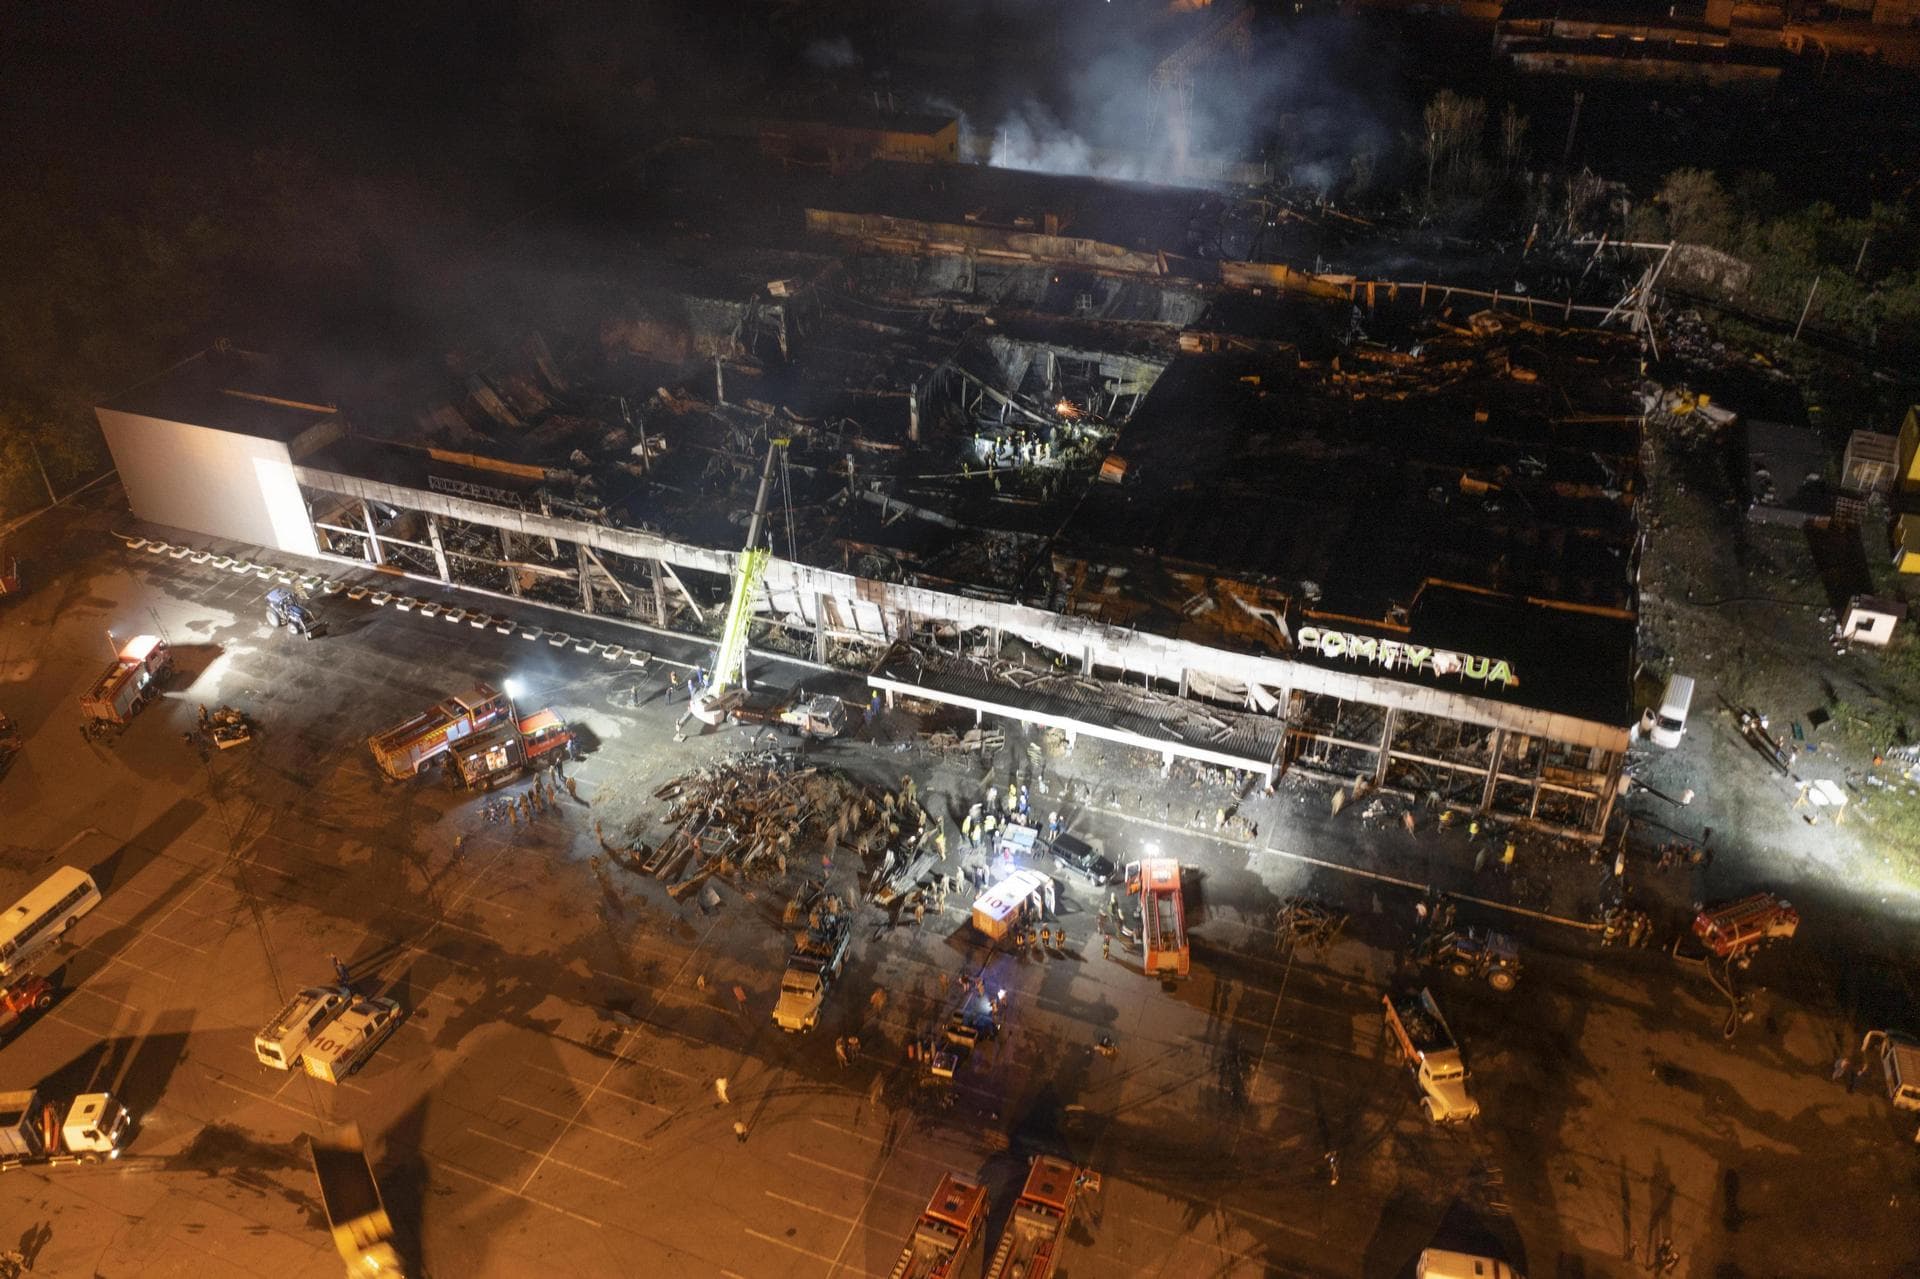 Ukrainian State Emergency Service firefighters work to extinguish a fire at a shopping center burned after a rocket attack in Kremenchuk